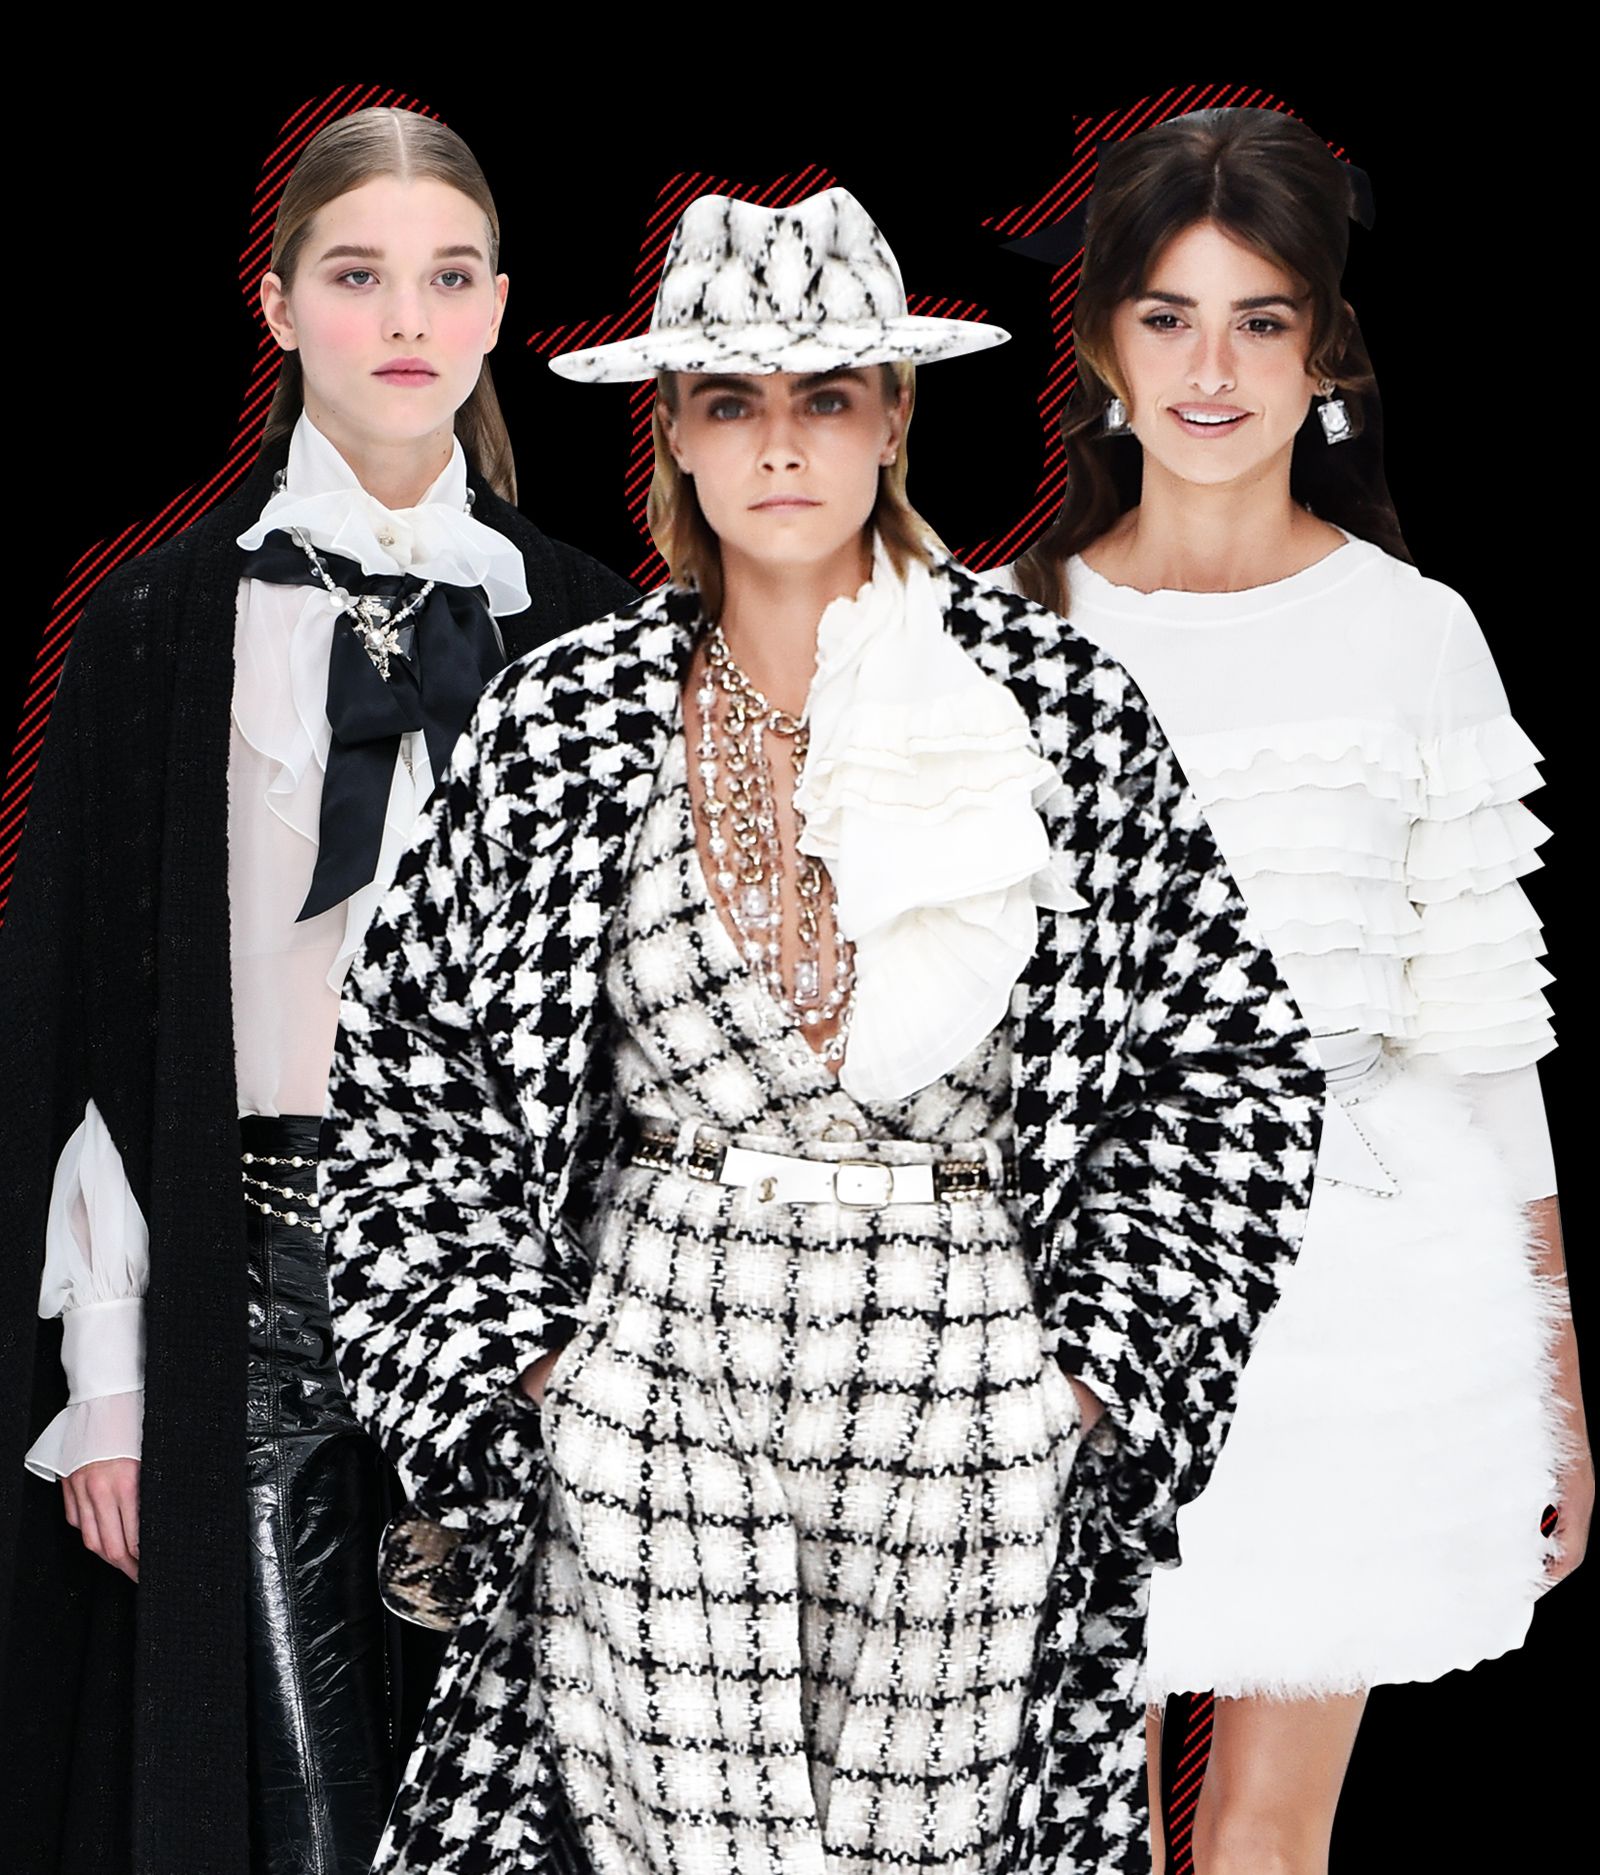 We prefer a dream over controversy': Chanel at Paris fashion week, Chanel